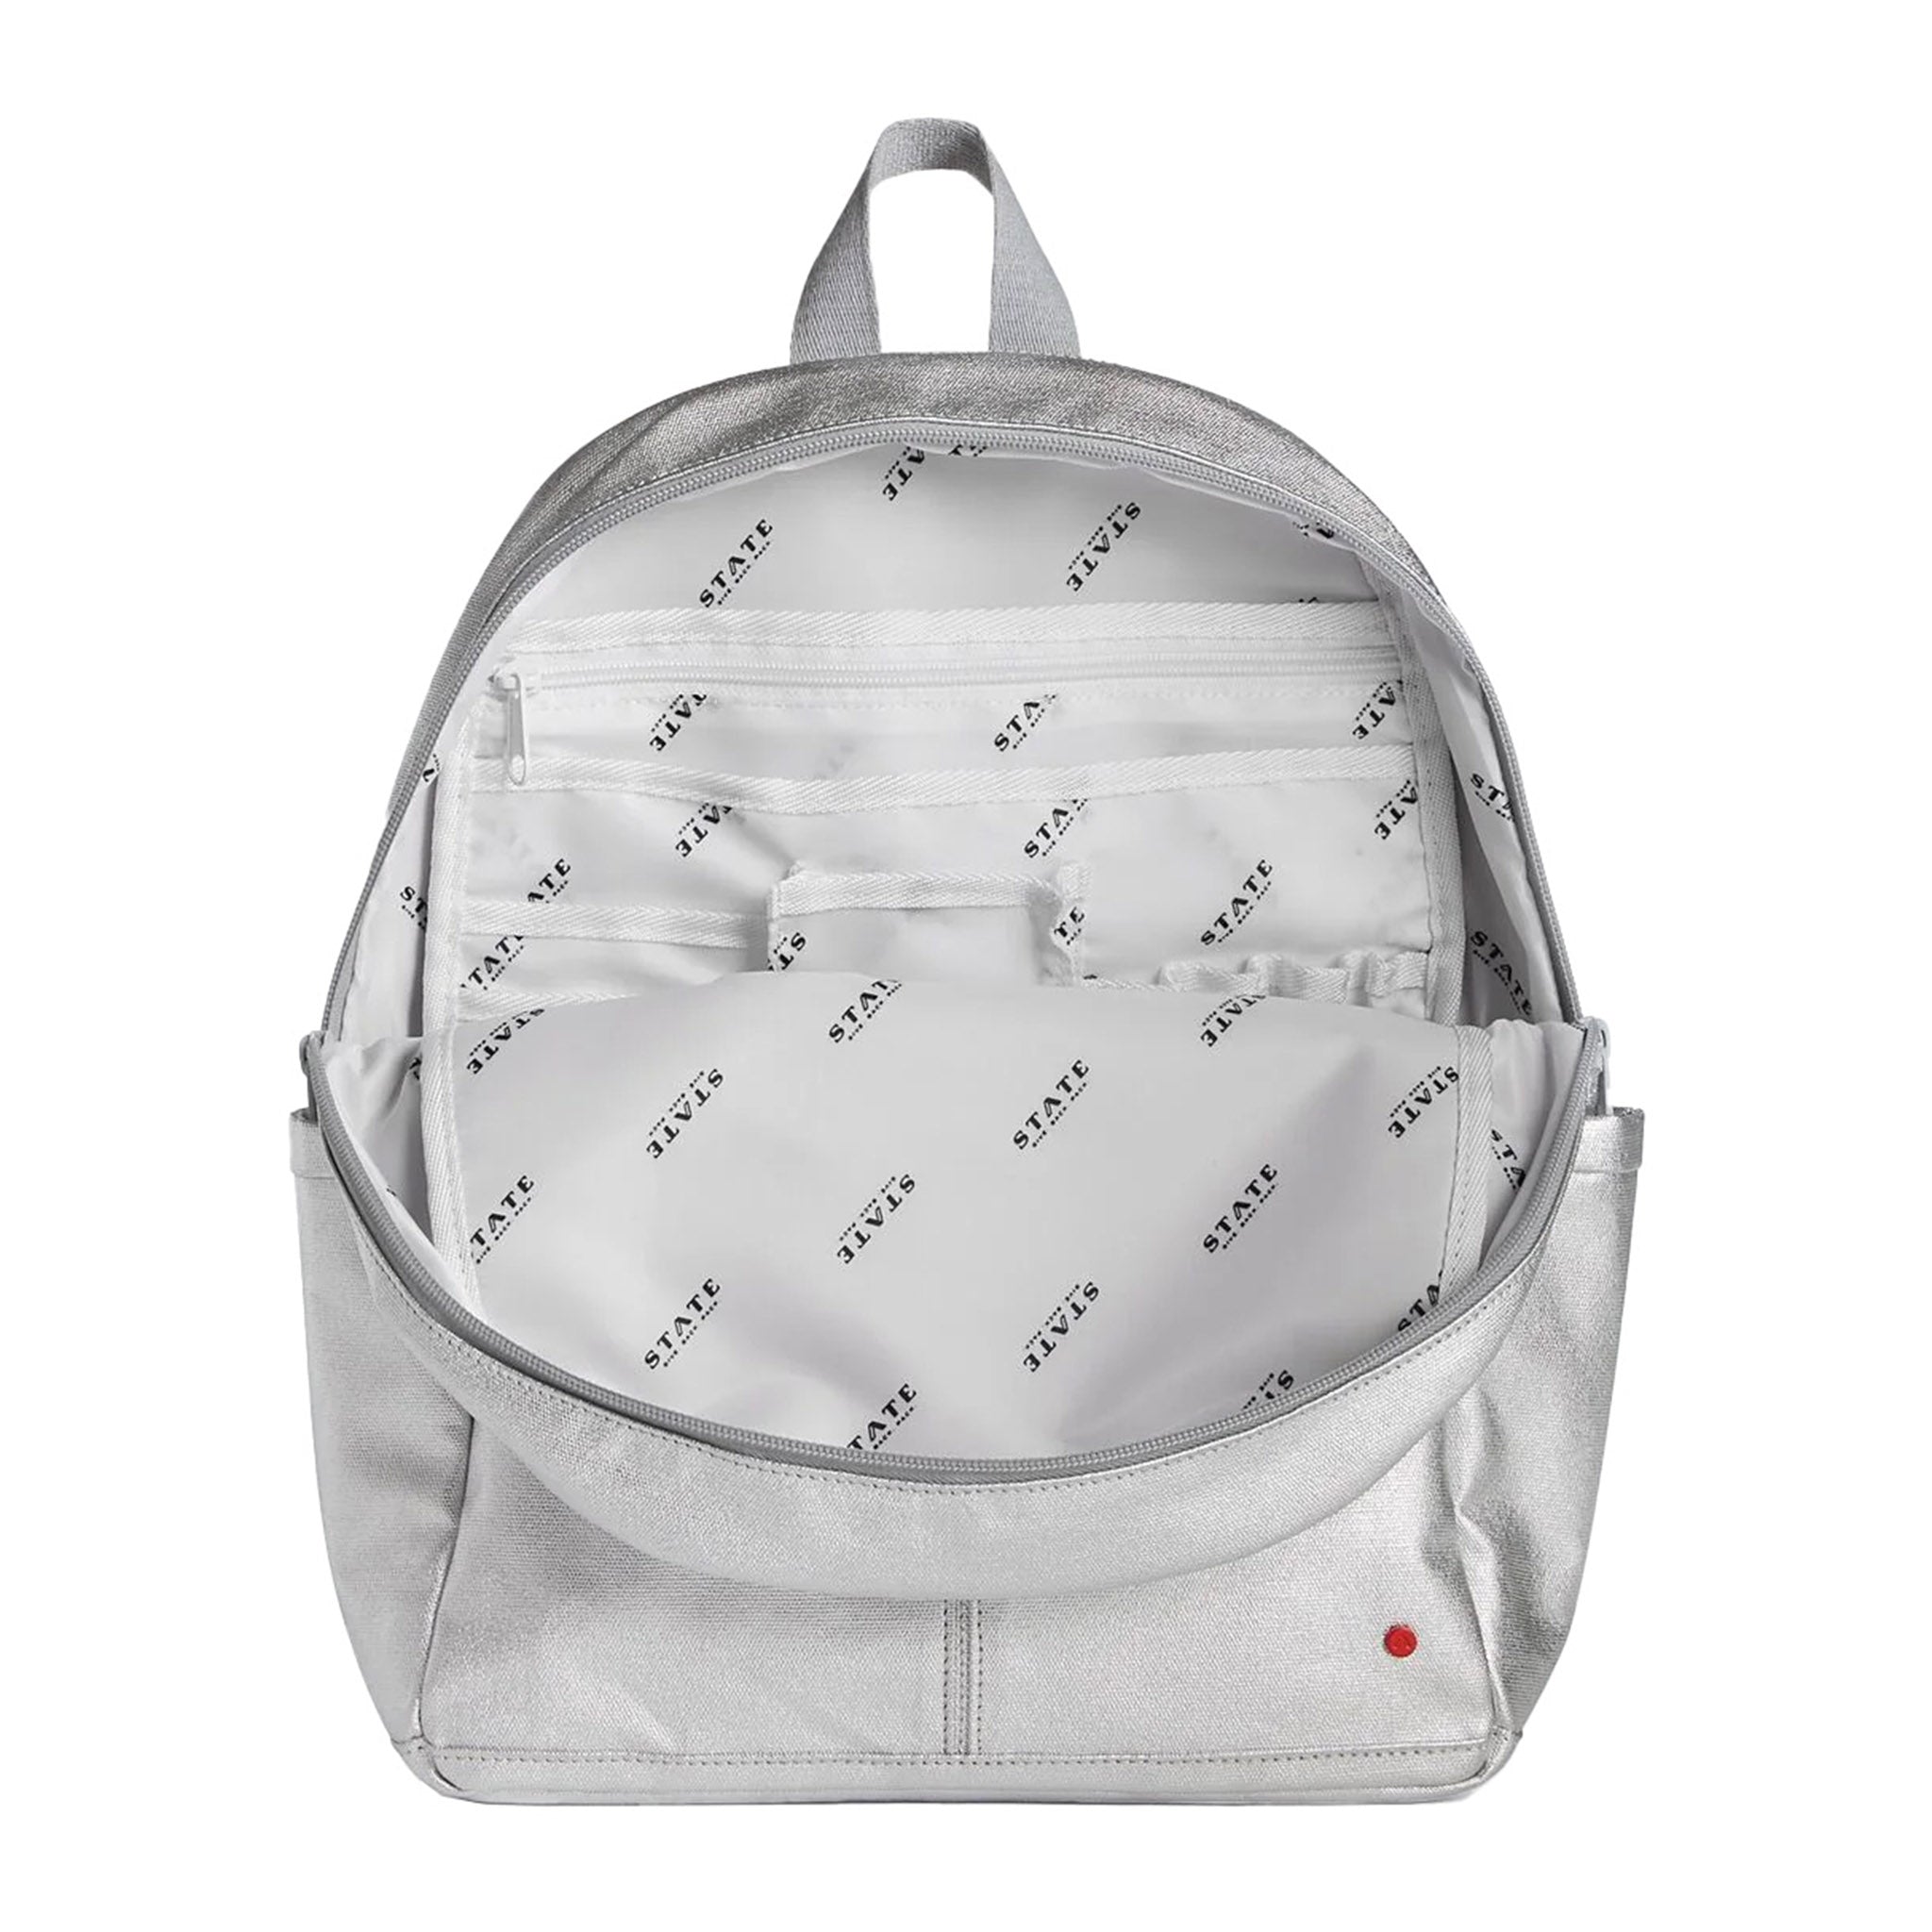 https://blueribbongeneralstore.com/cdn/shop/files/state-bags-kane-kids-silver-backpack-unzipped-to-show-interior-lining-and-pockets.jpg?v=1689264837